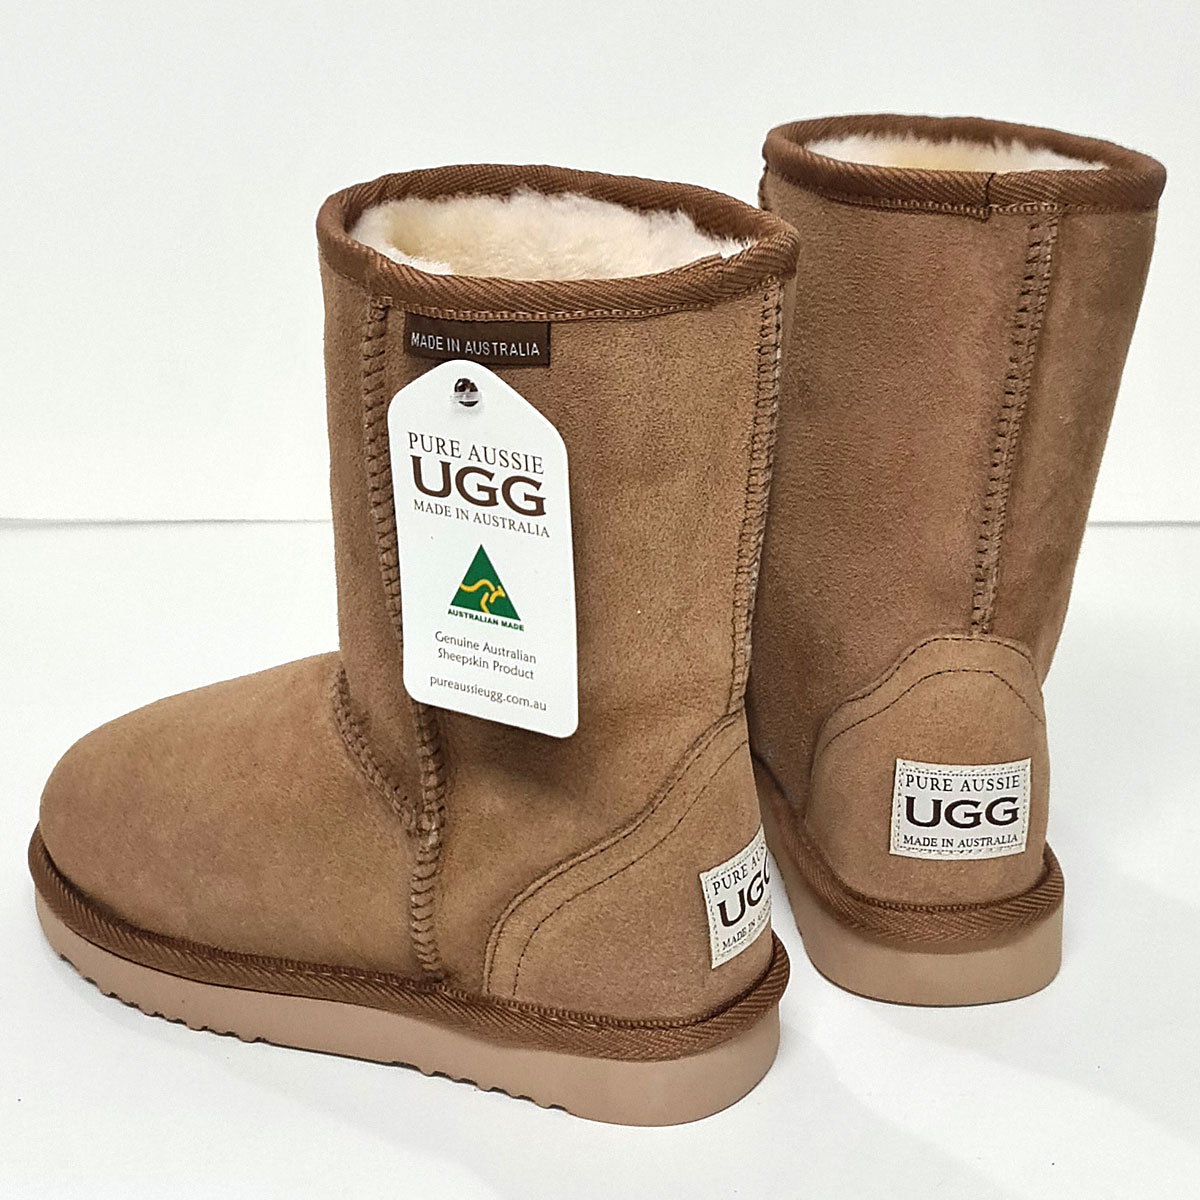 Genuine Ugg Boots Made in Australia